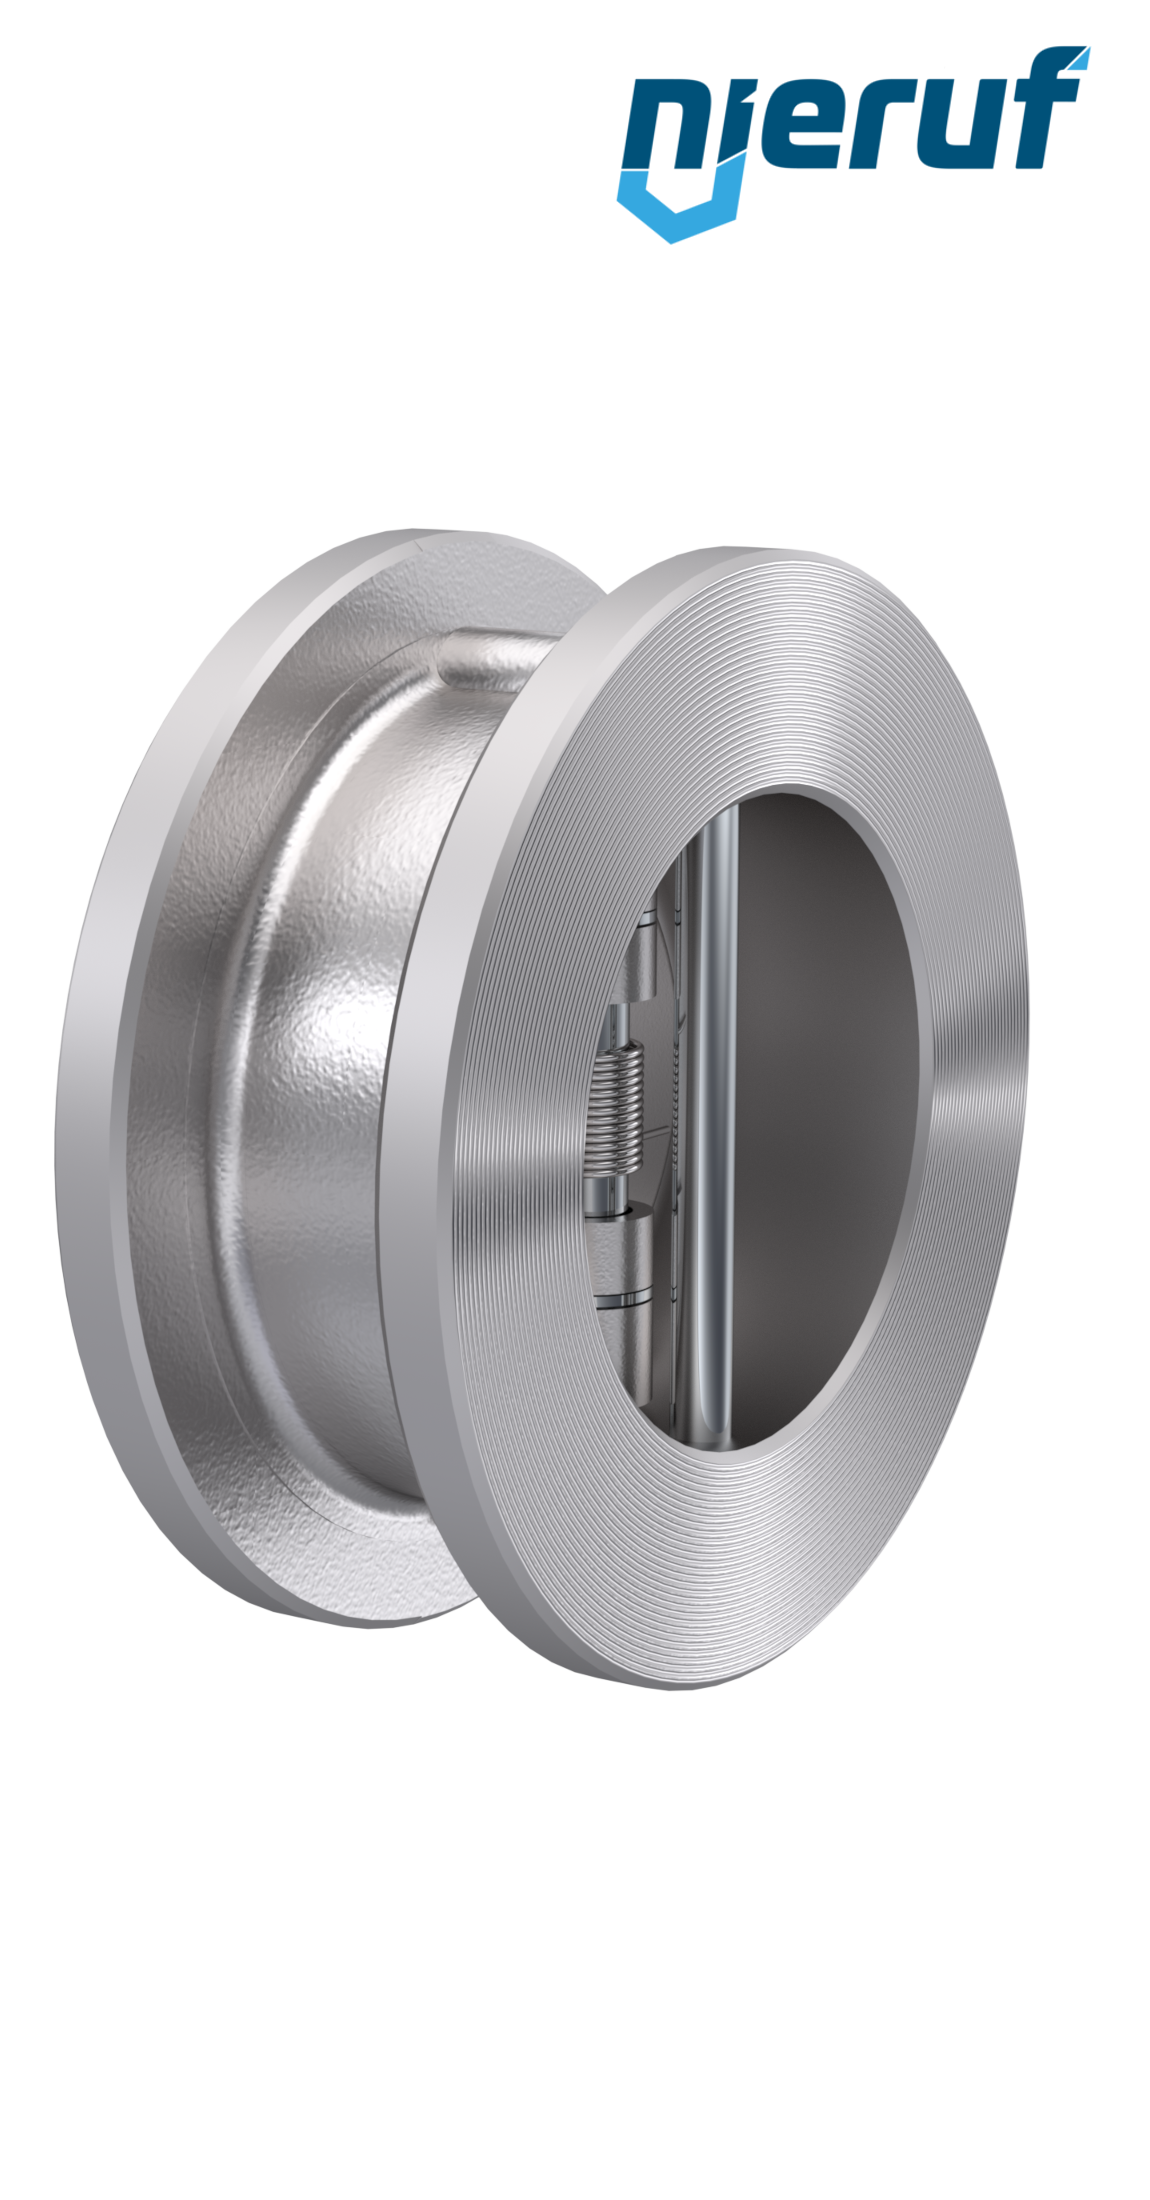 dual plate check valve DN100 DR03 ANSI 150 stainless steel 1.4408 metal